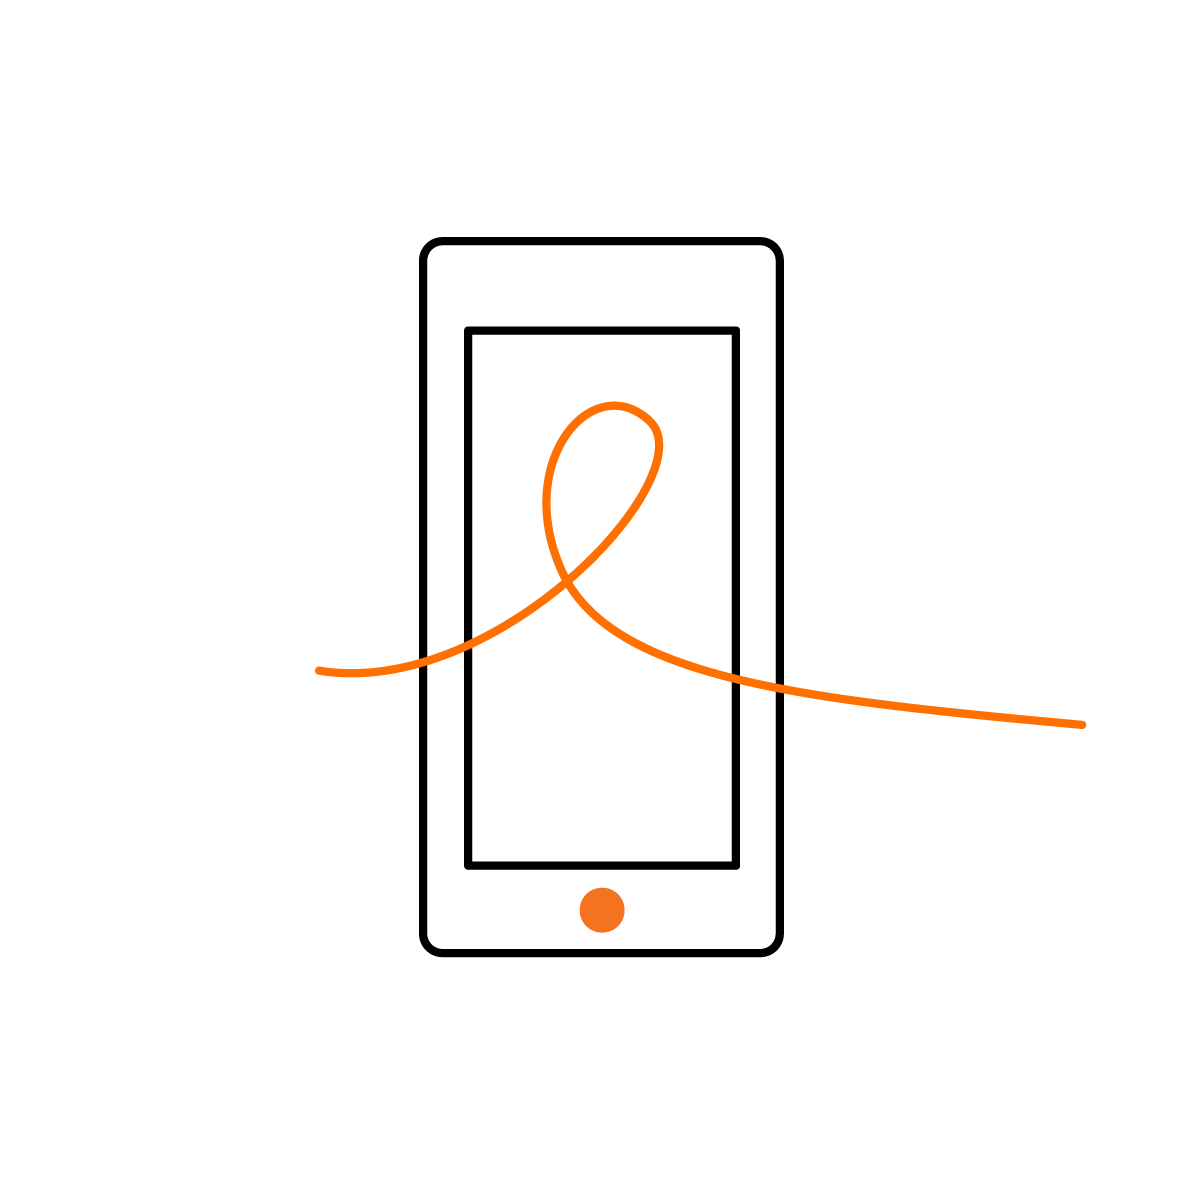 An illustration of a smartphone with an orange infinity symbol representing student outcomes displayed onscreen and extending beyond the device borders.